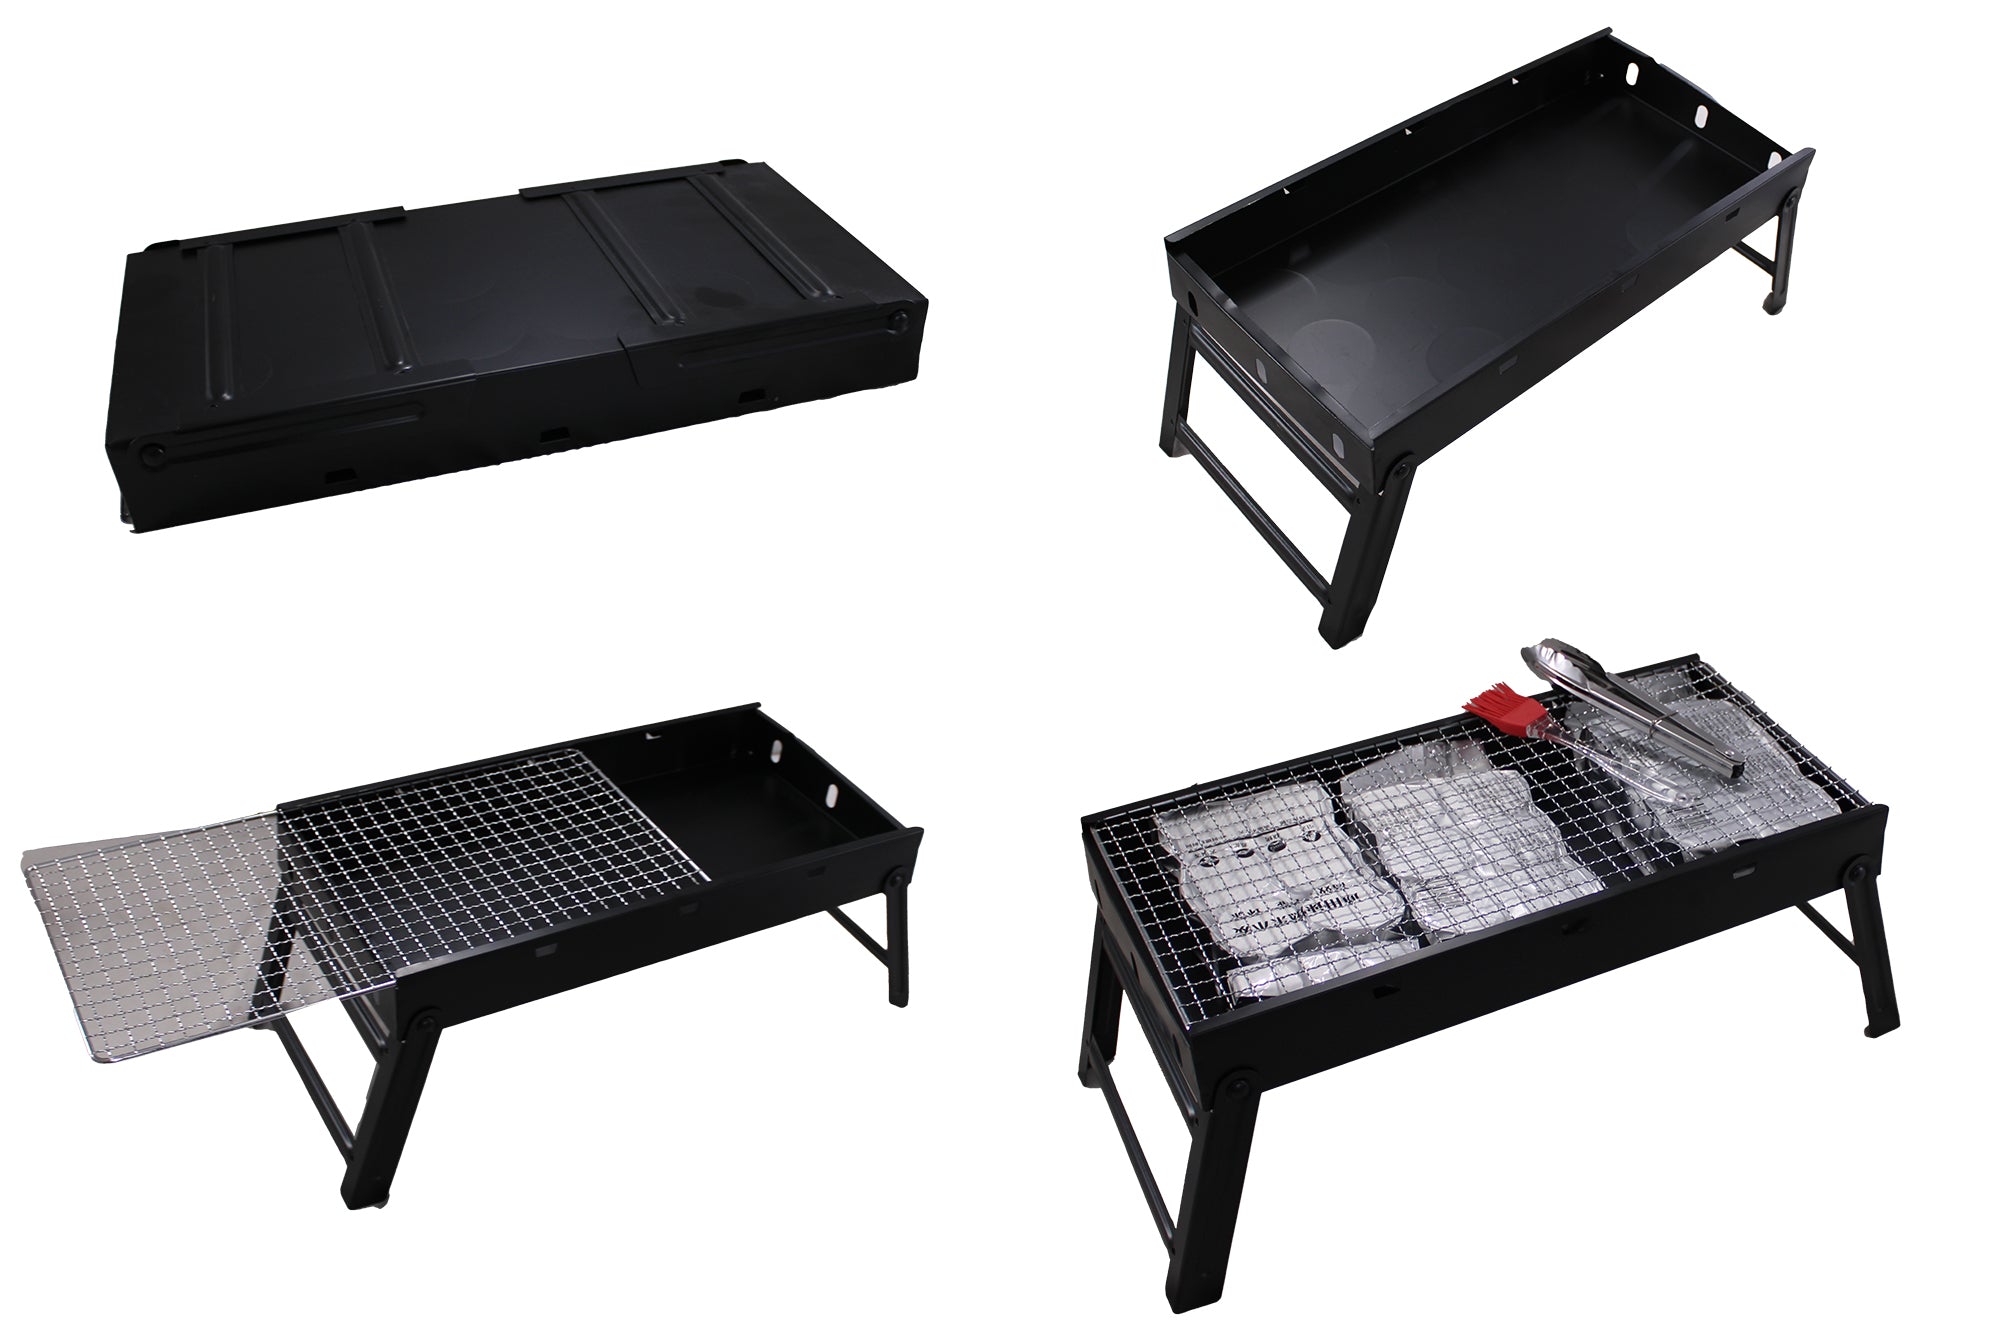 Foldable Camping Braai Grill with Tongs & Basting Brush FX-8495 - 42x22x19cm